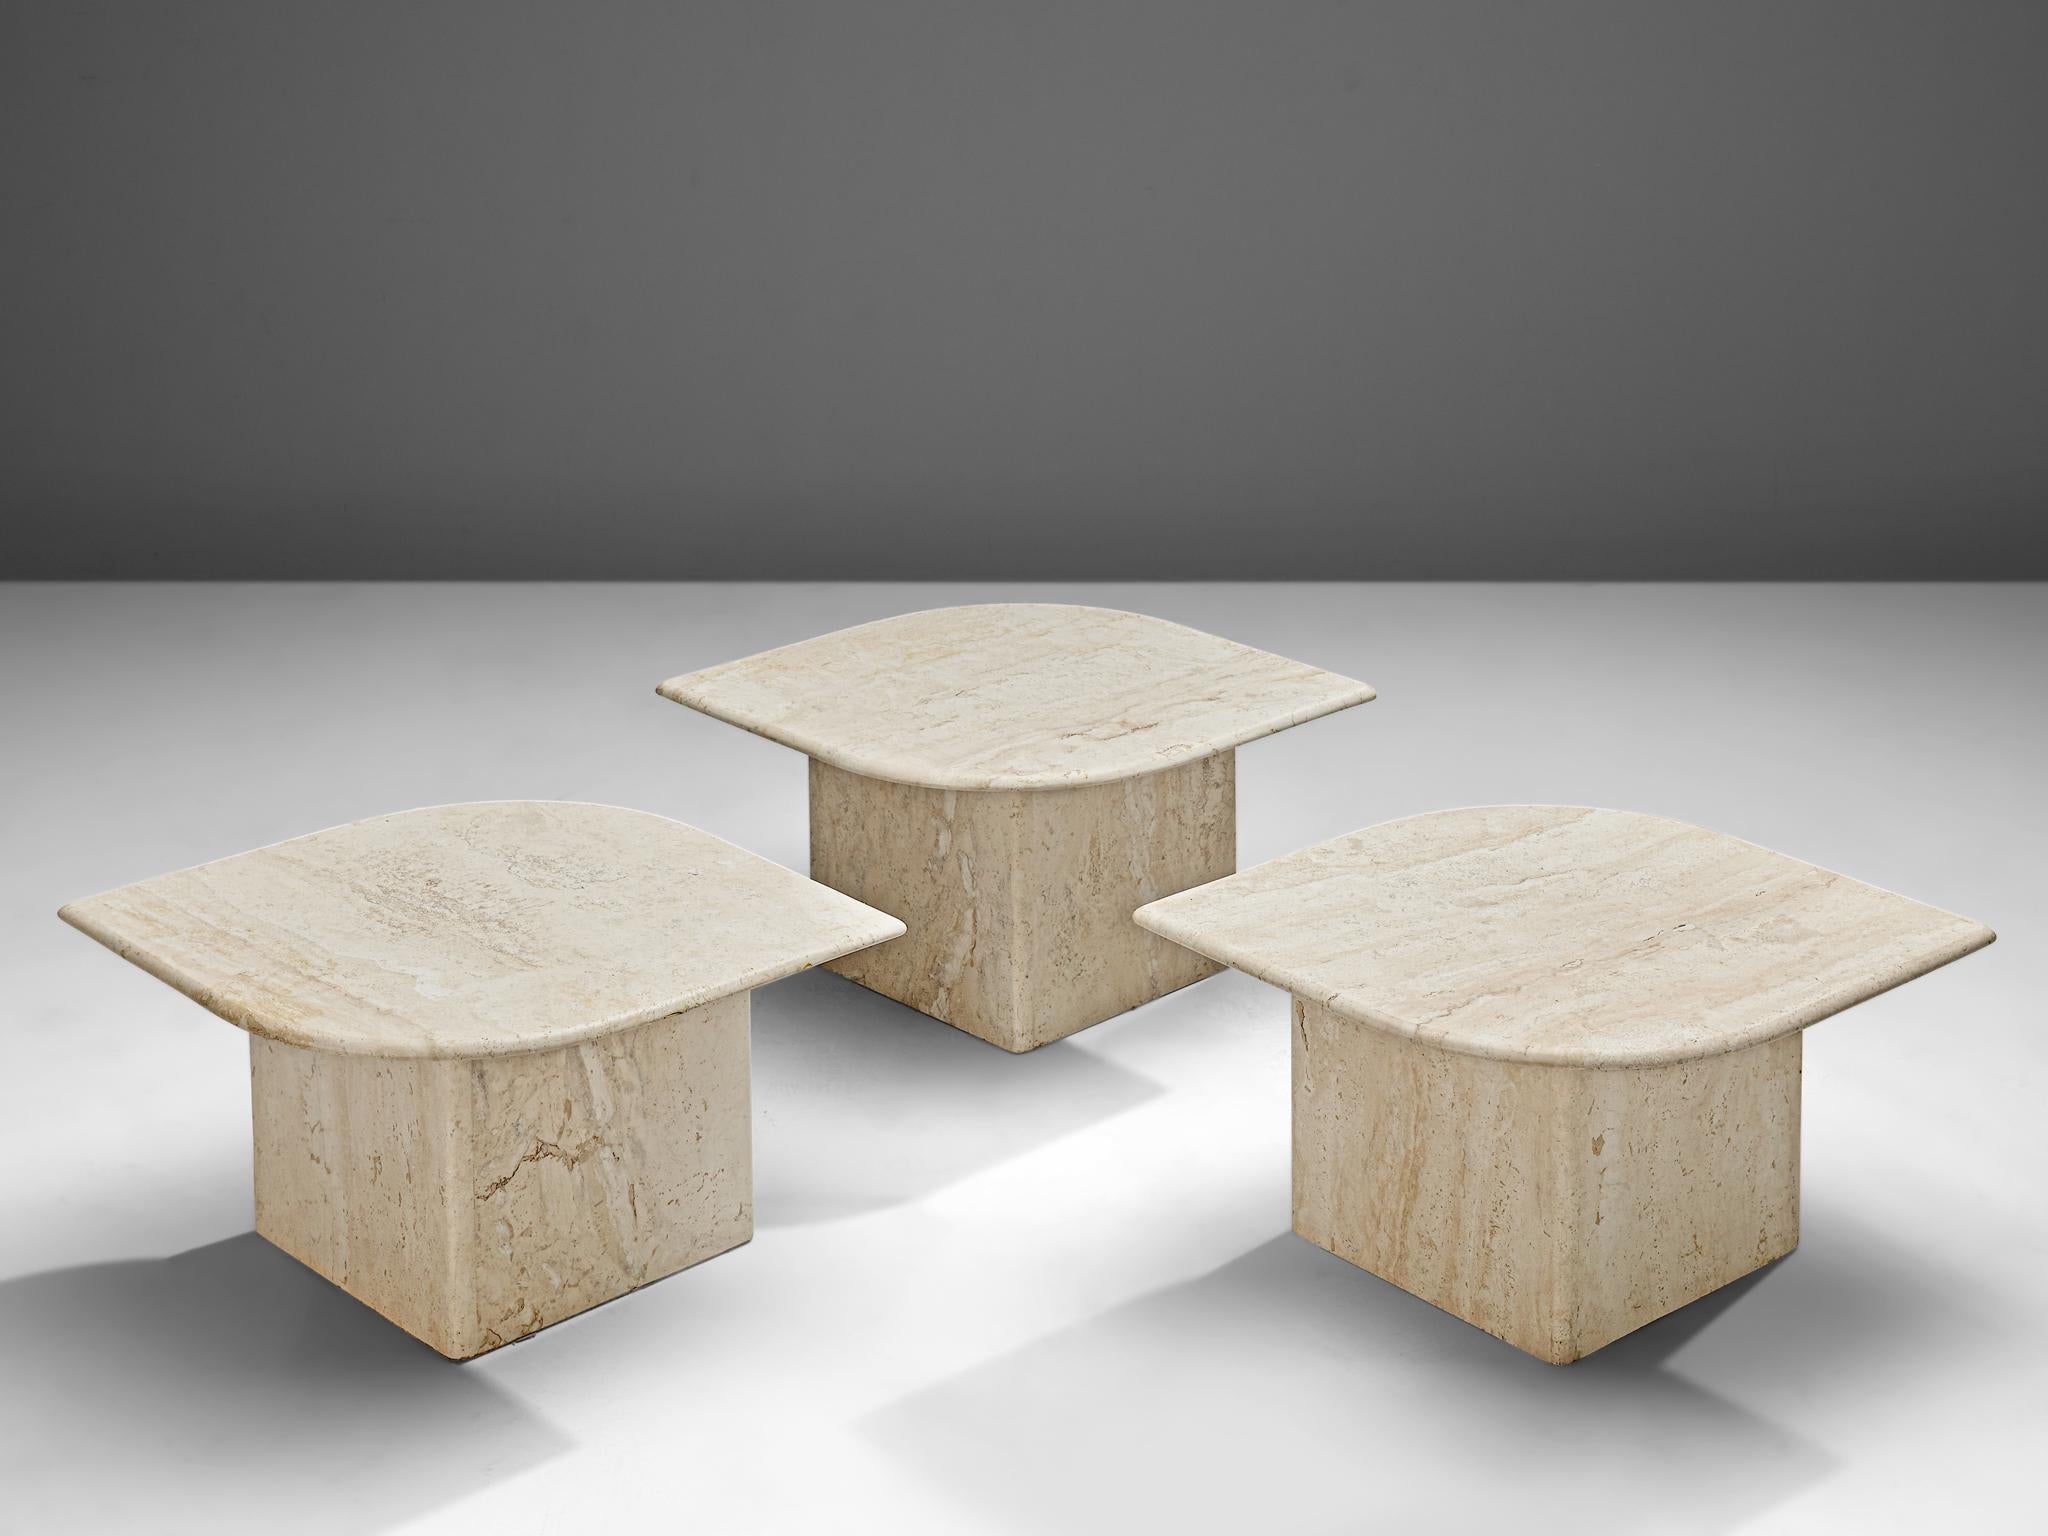 Set of three coffee tables, travertine, Italy, 1970s.

This set of three coffee tables each feature a leaf-shaped travertine tabletop and an L-shaped base. The aesthetics are archetypical for postmodern design, referencing architectural shapes and